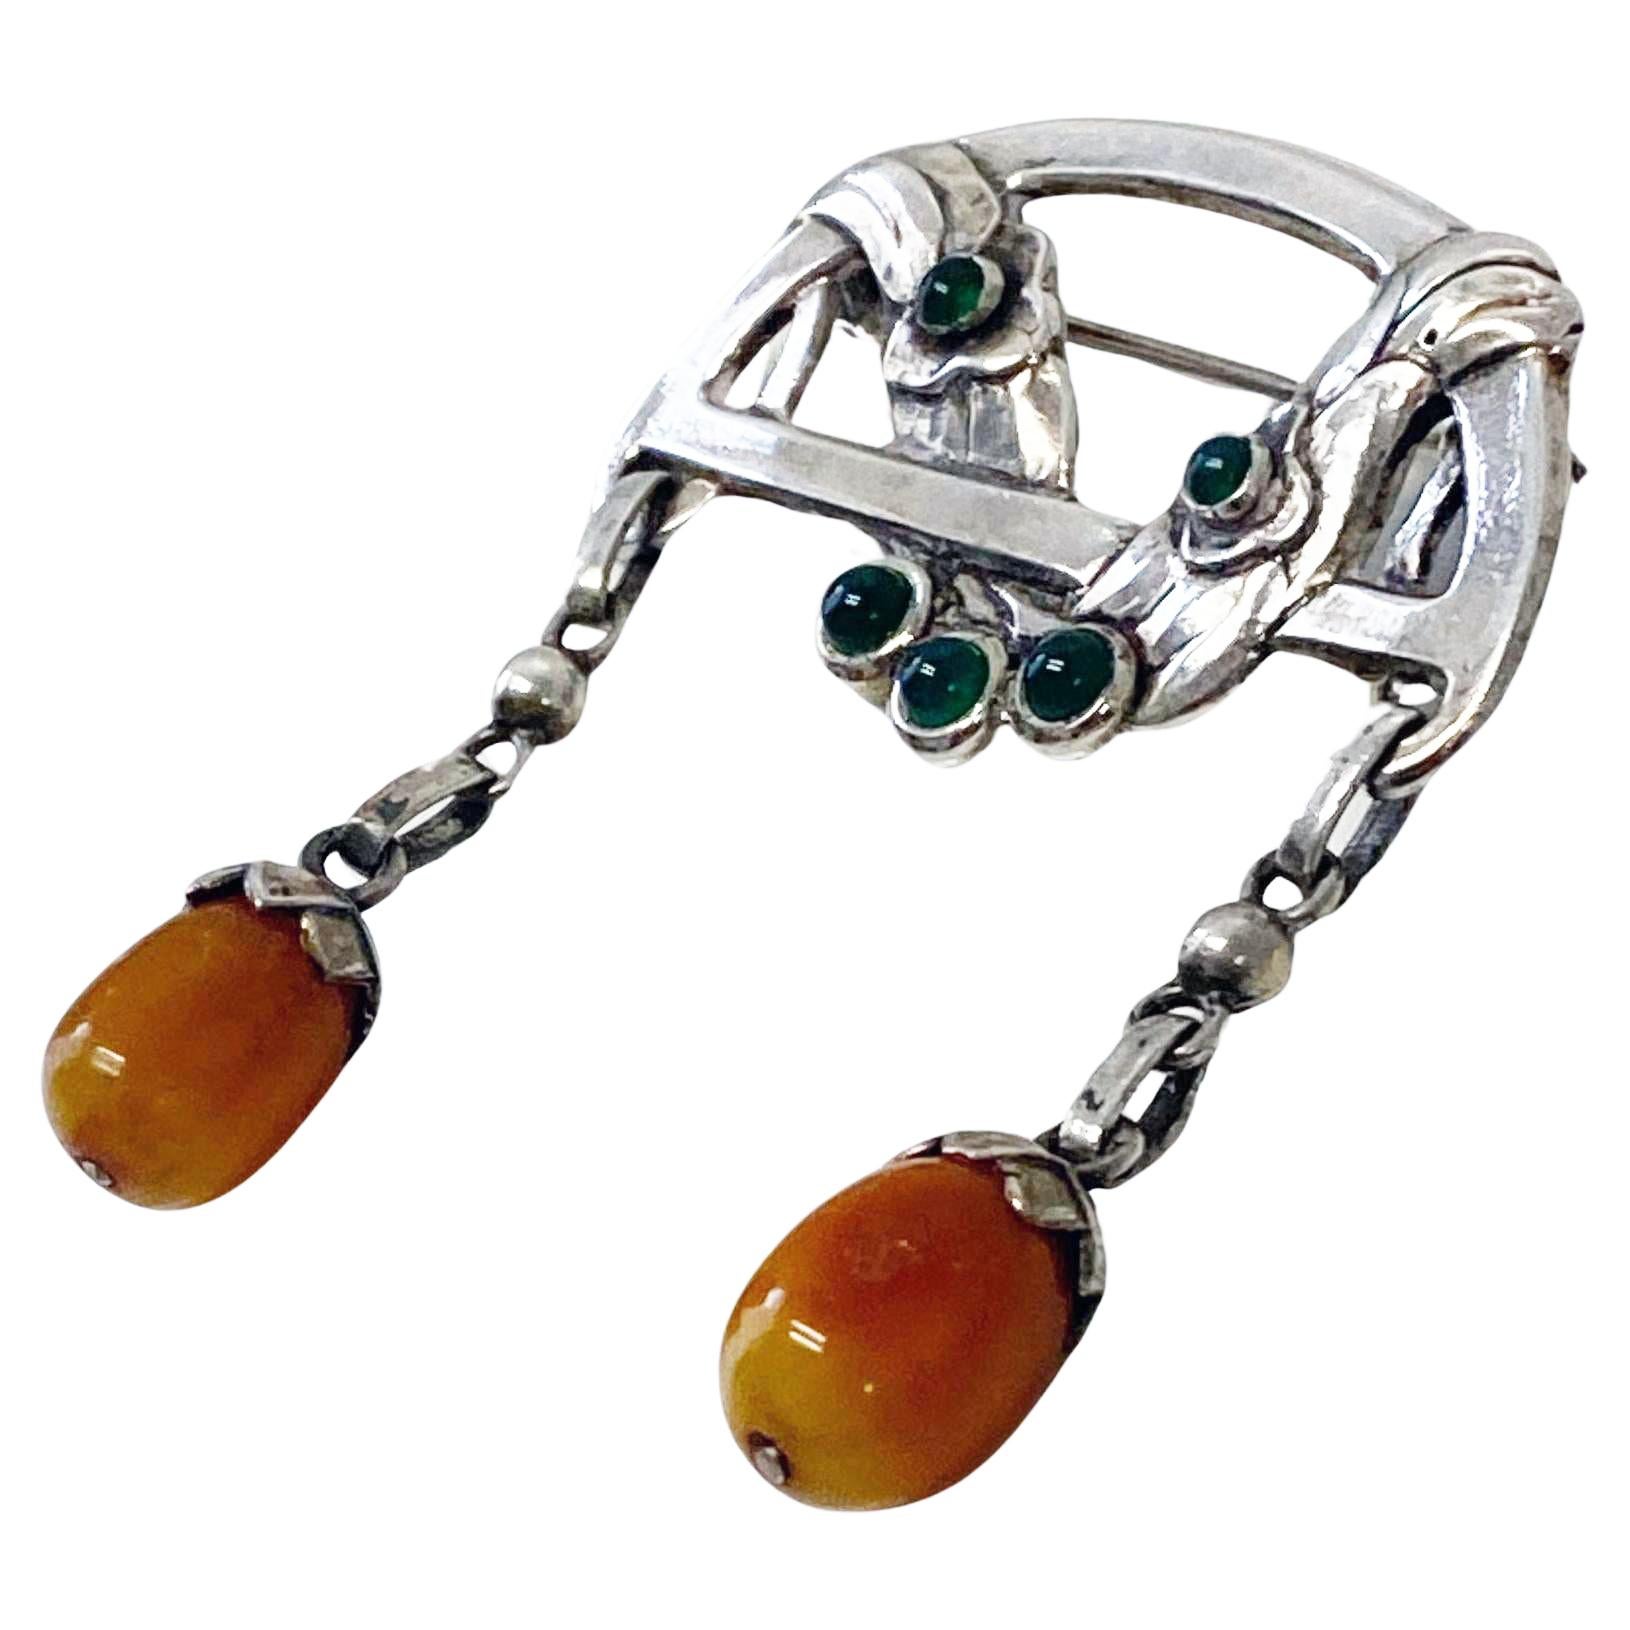 Cabochon Antique early Georg Jensen Amber and Agate Brooch C.1908 design #8 For Sale